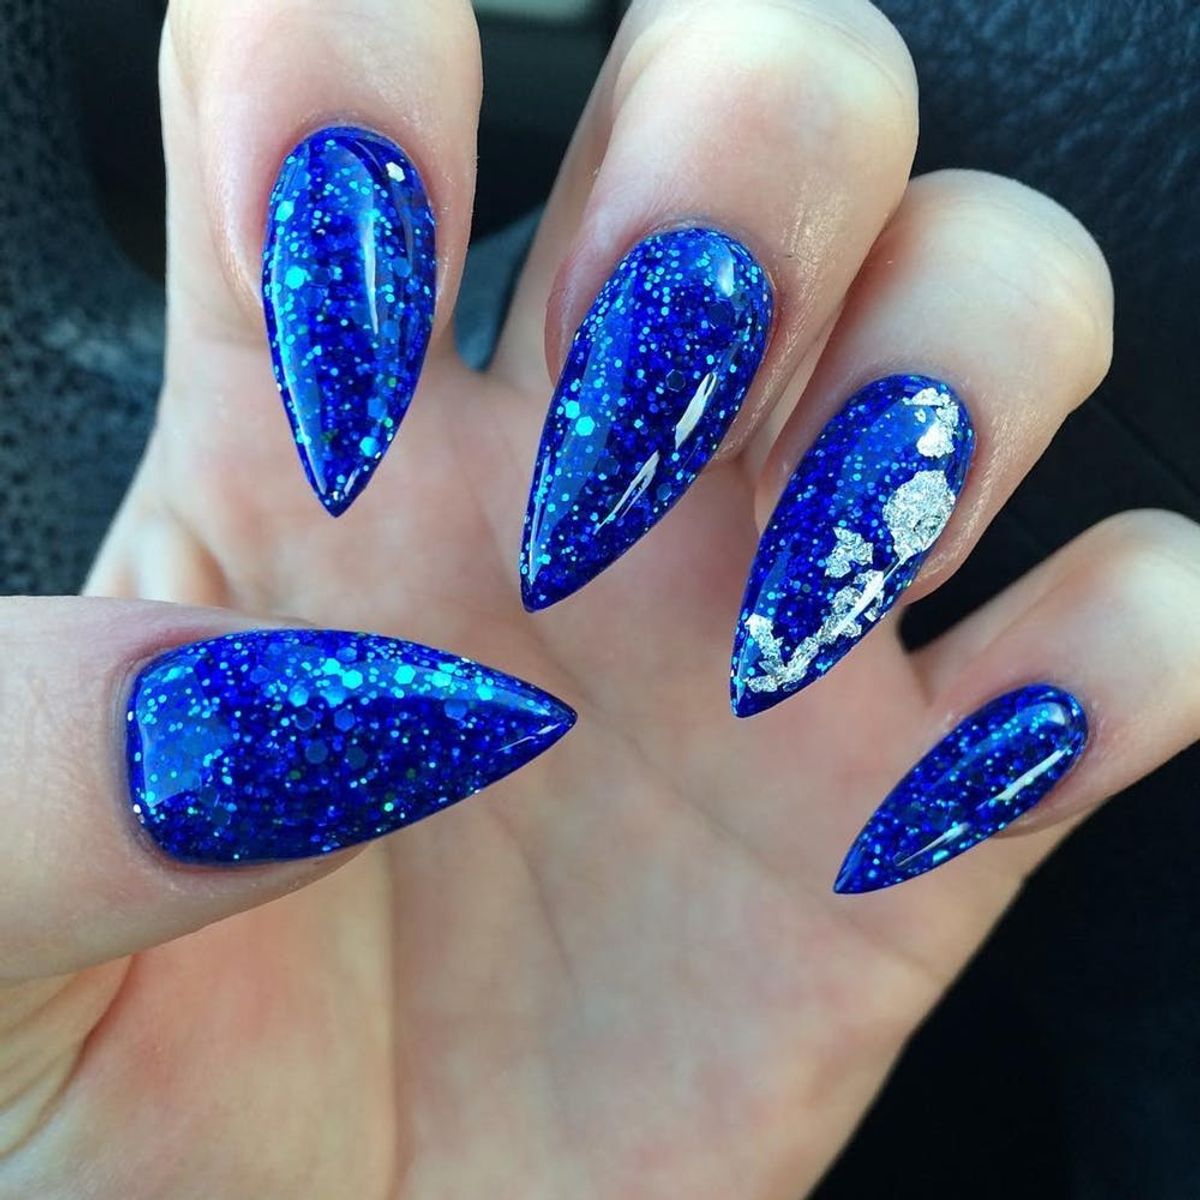 13 Ice Cold Nail Looks That Would Make Elsa Proud